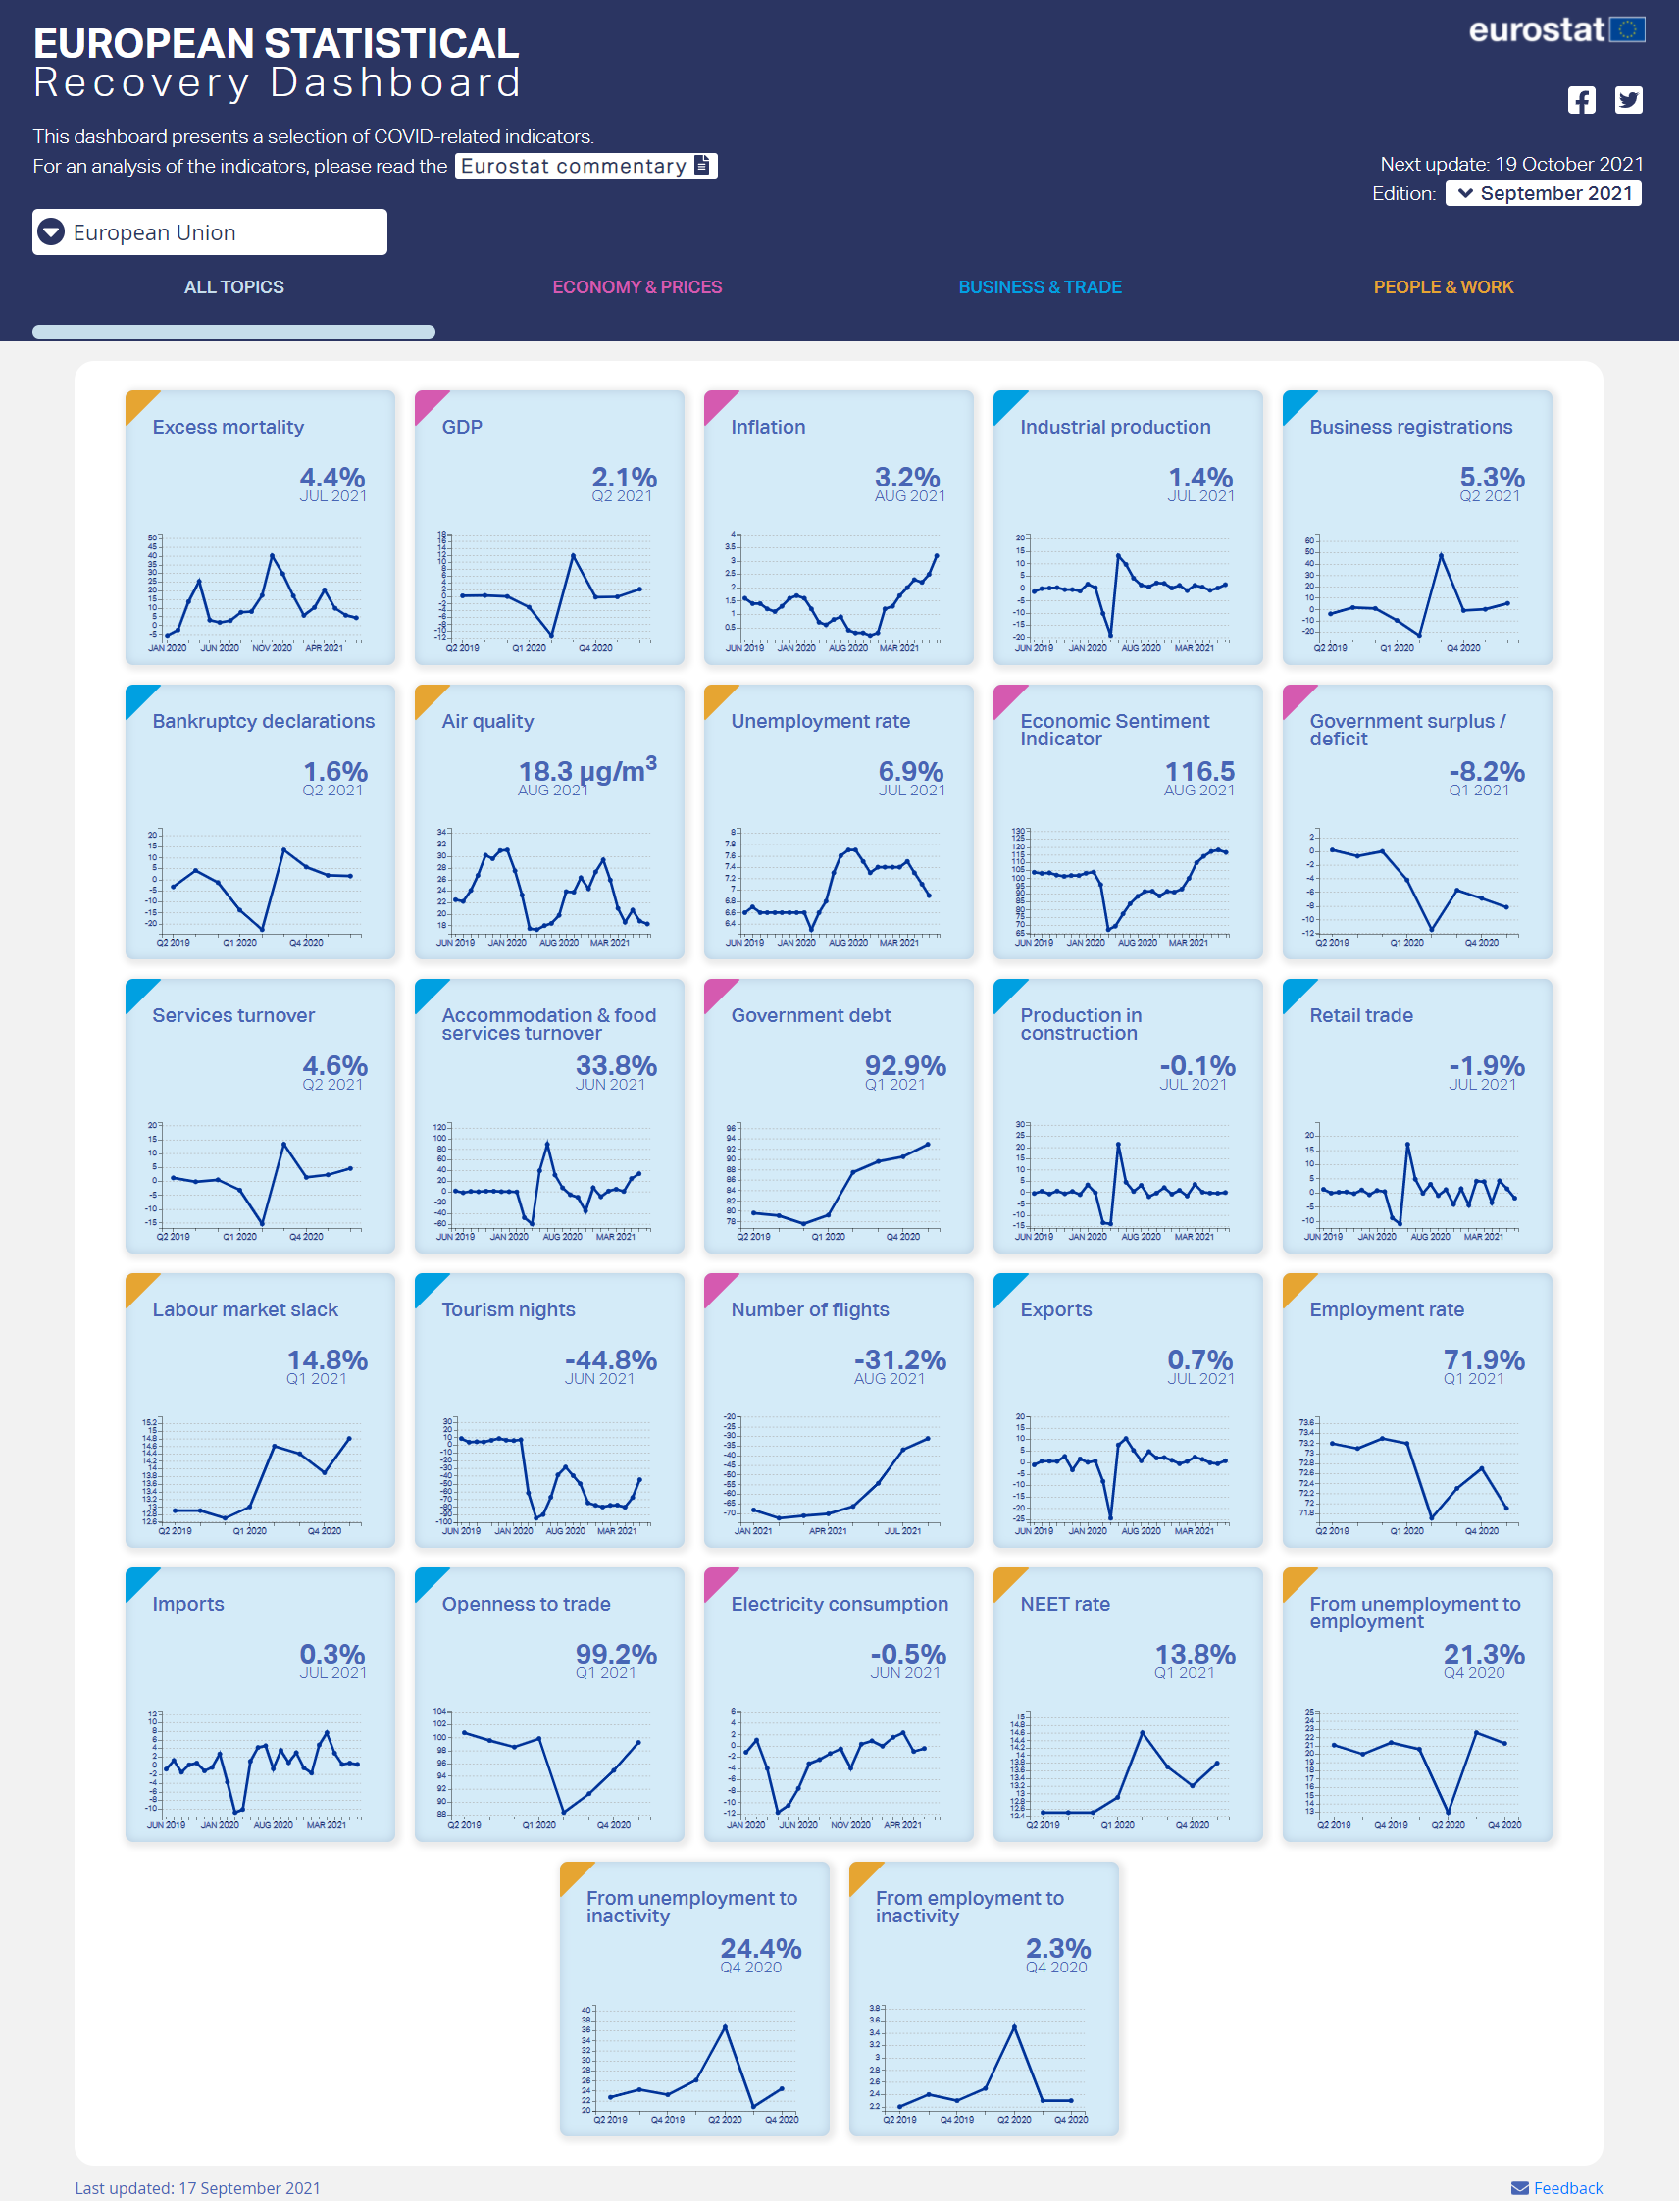 Screenshot of the European Statistical Recovery Dashboard - September edition